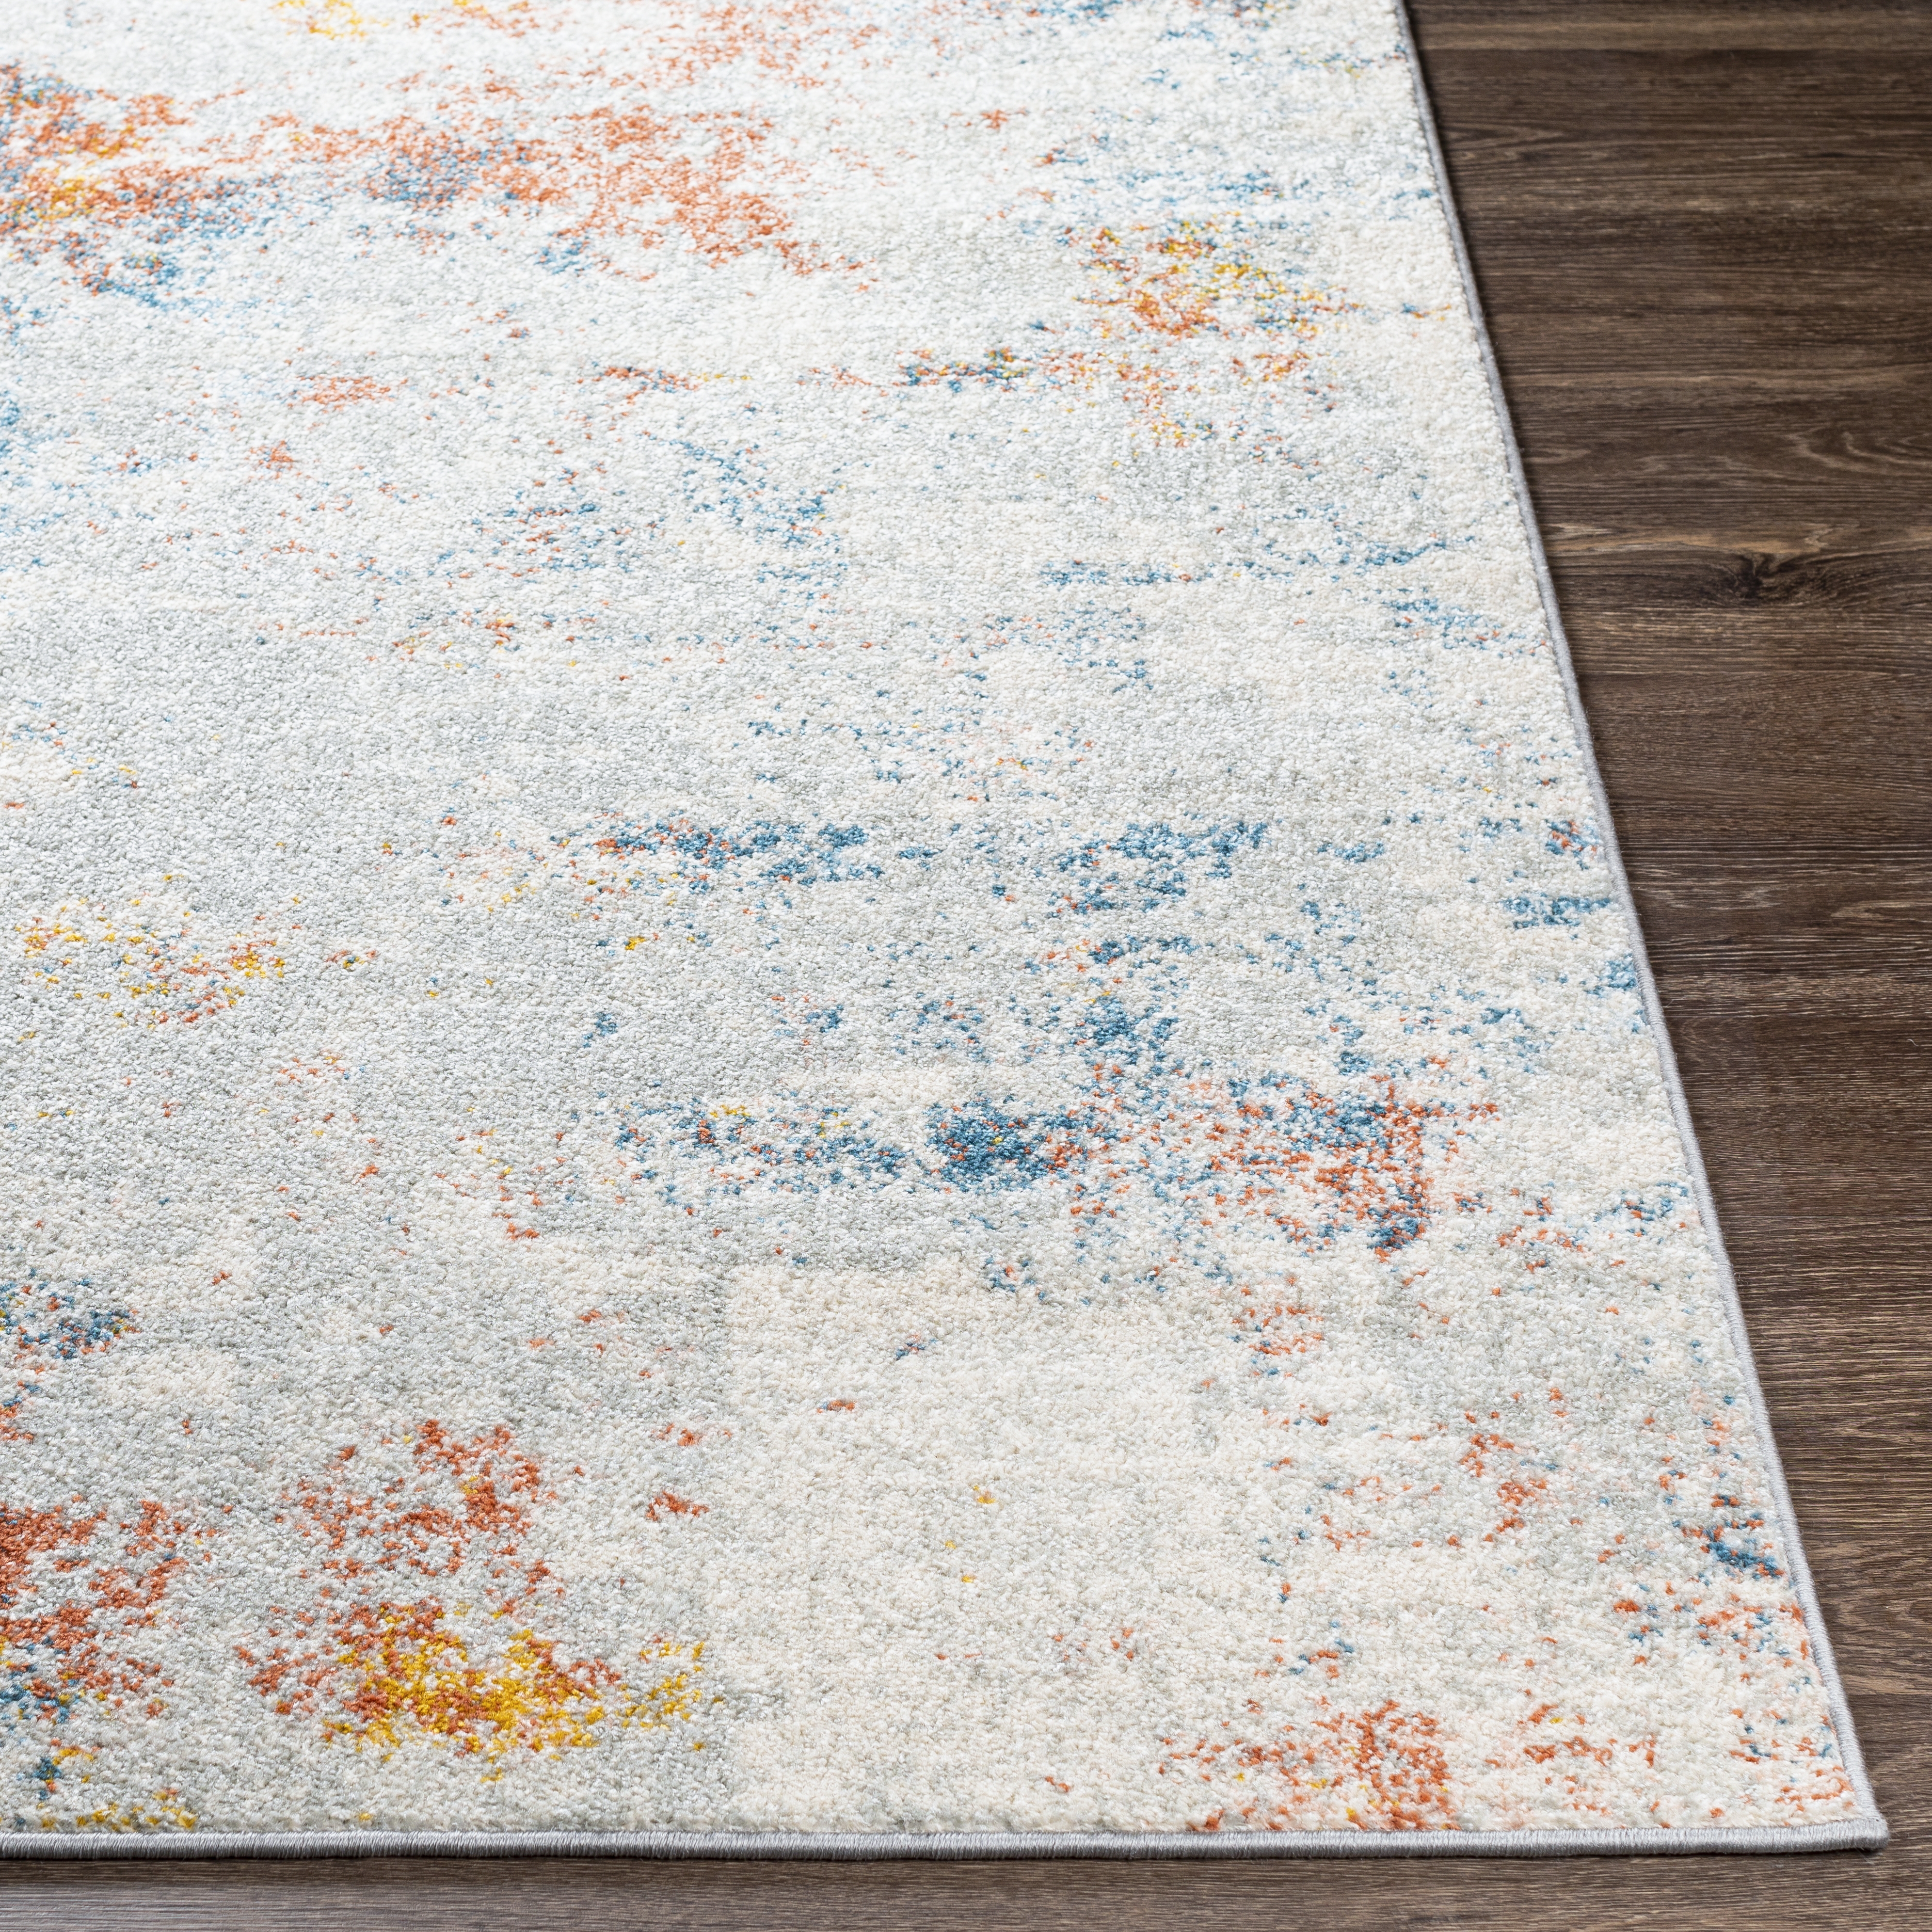 Chester Rug, 6'7" x 9' - Image 5